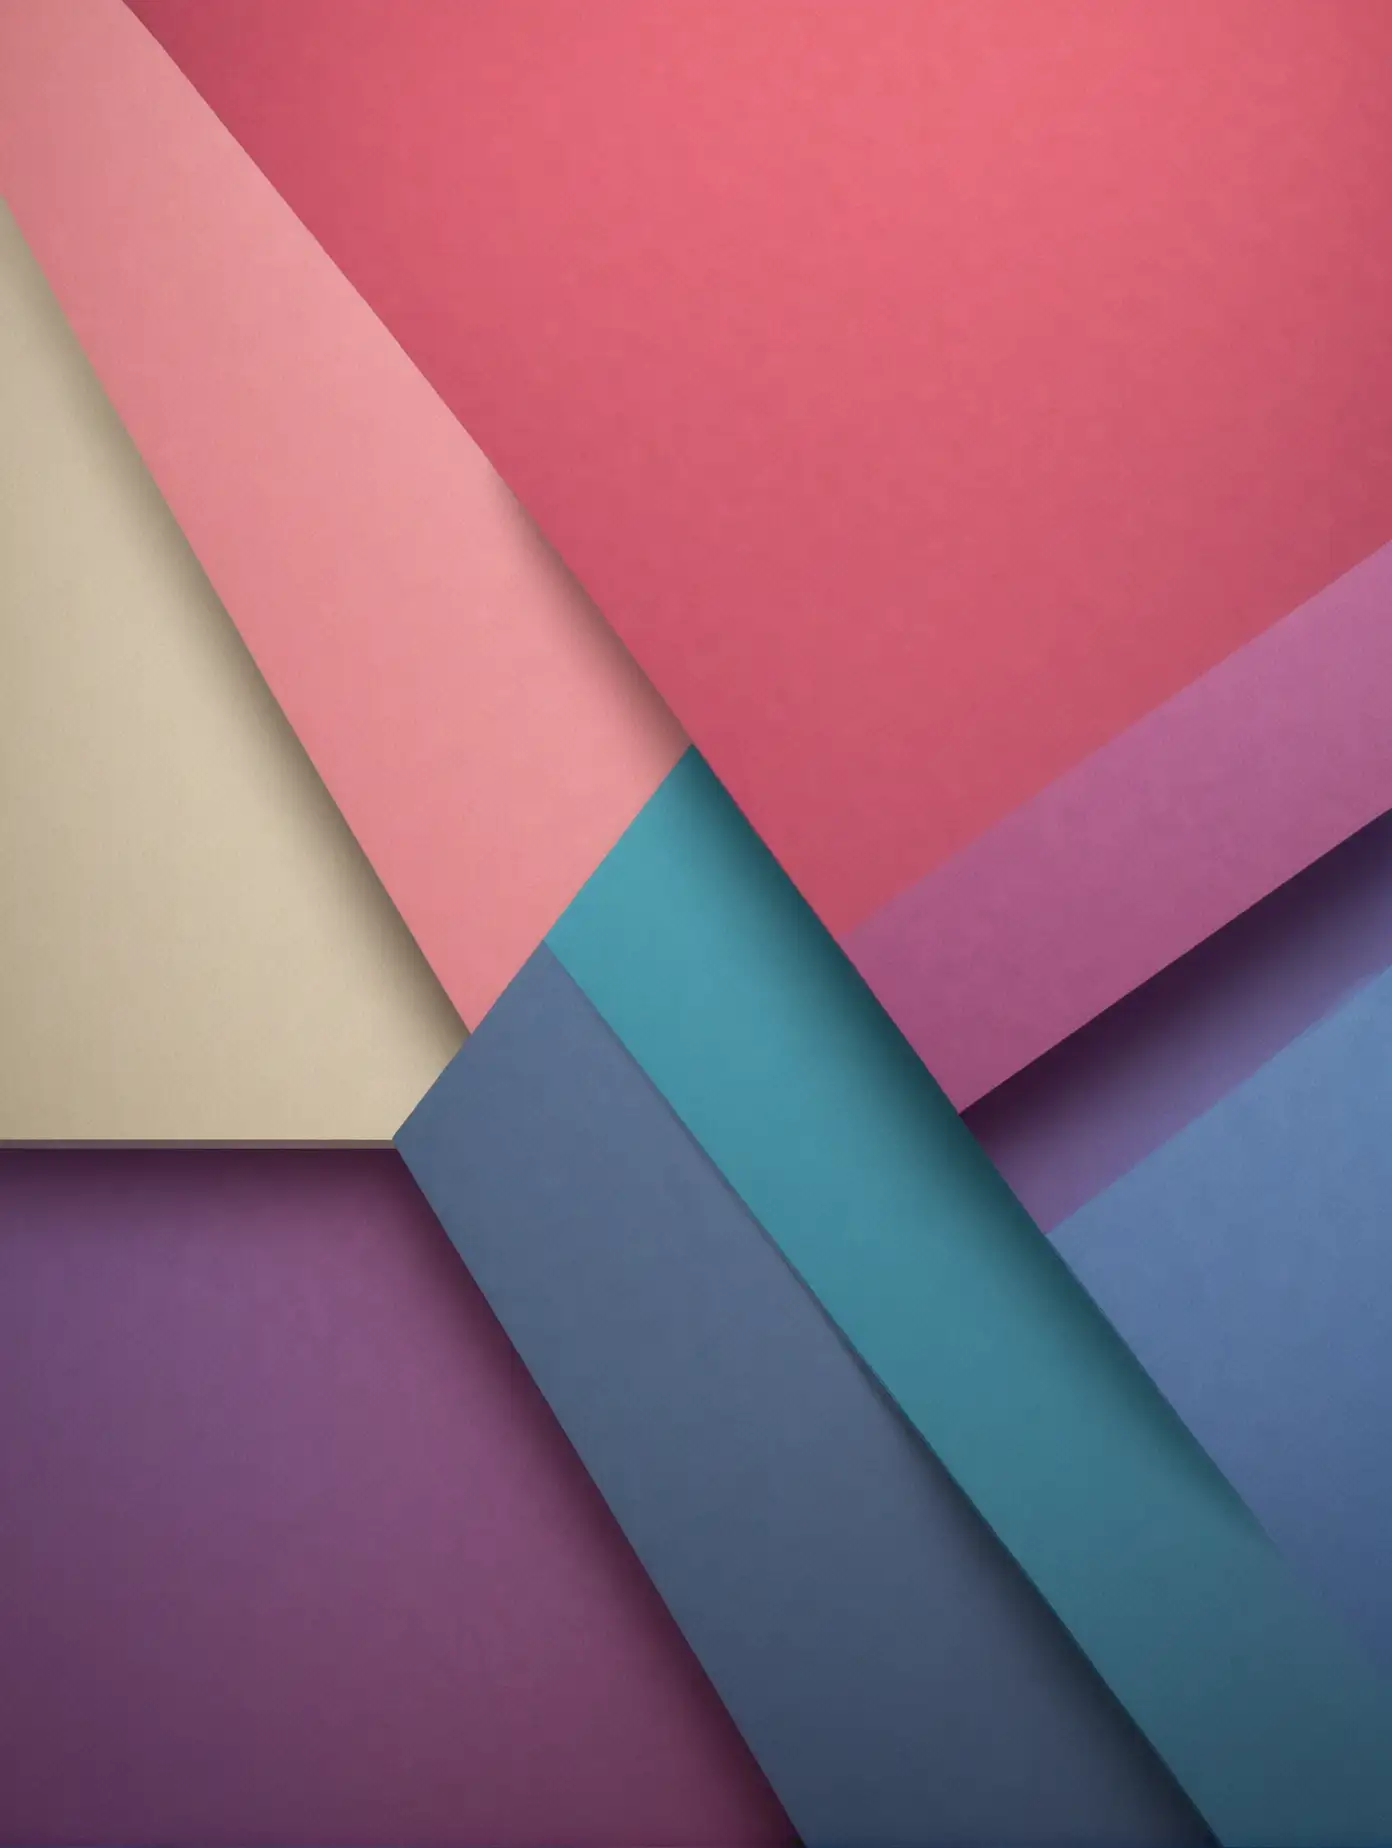 Colorful Material Design Themed Illustration